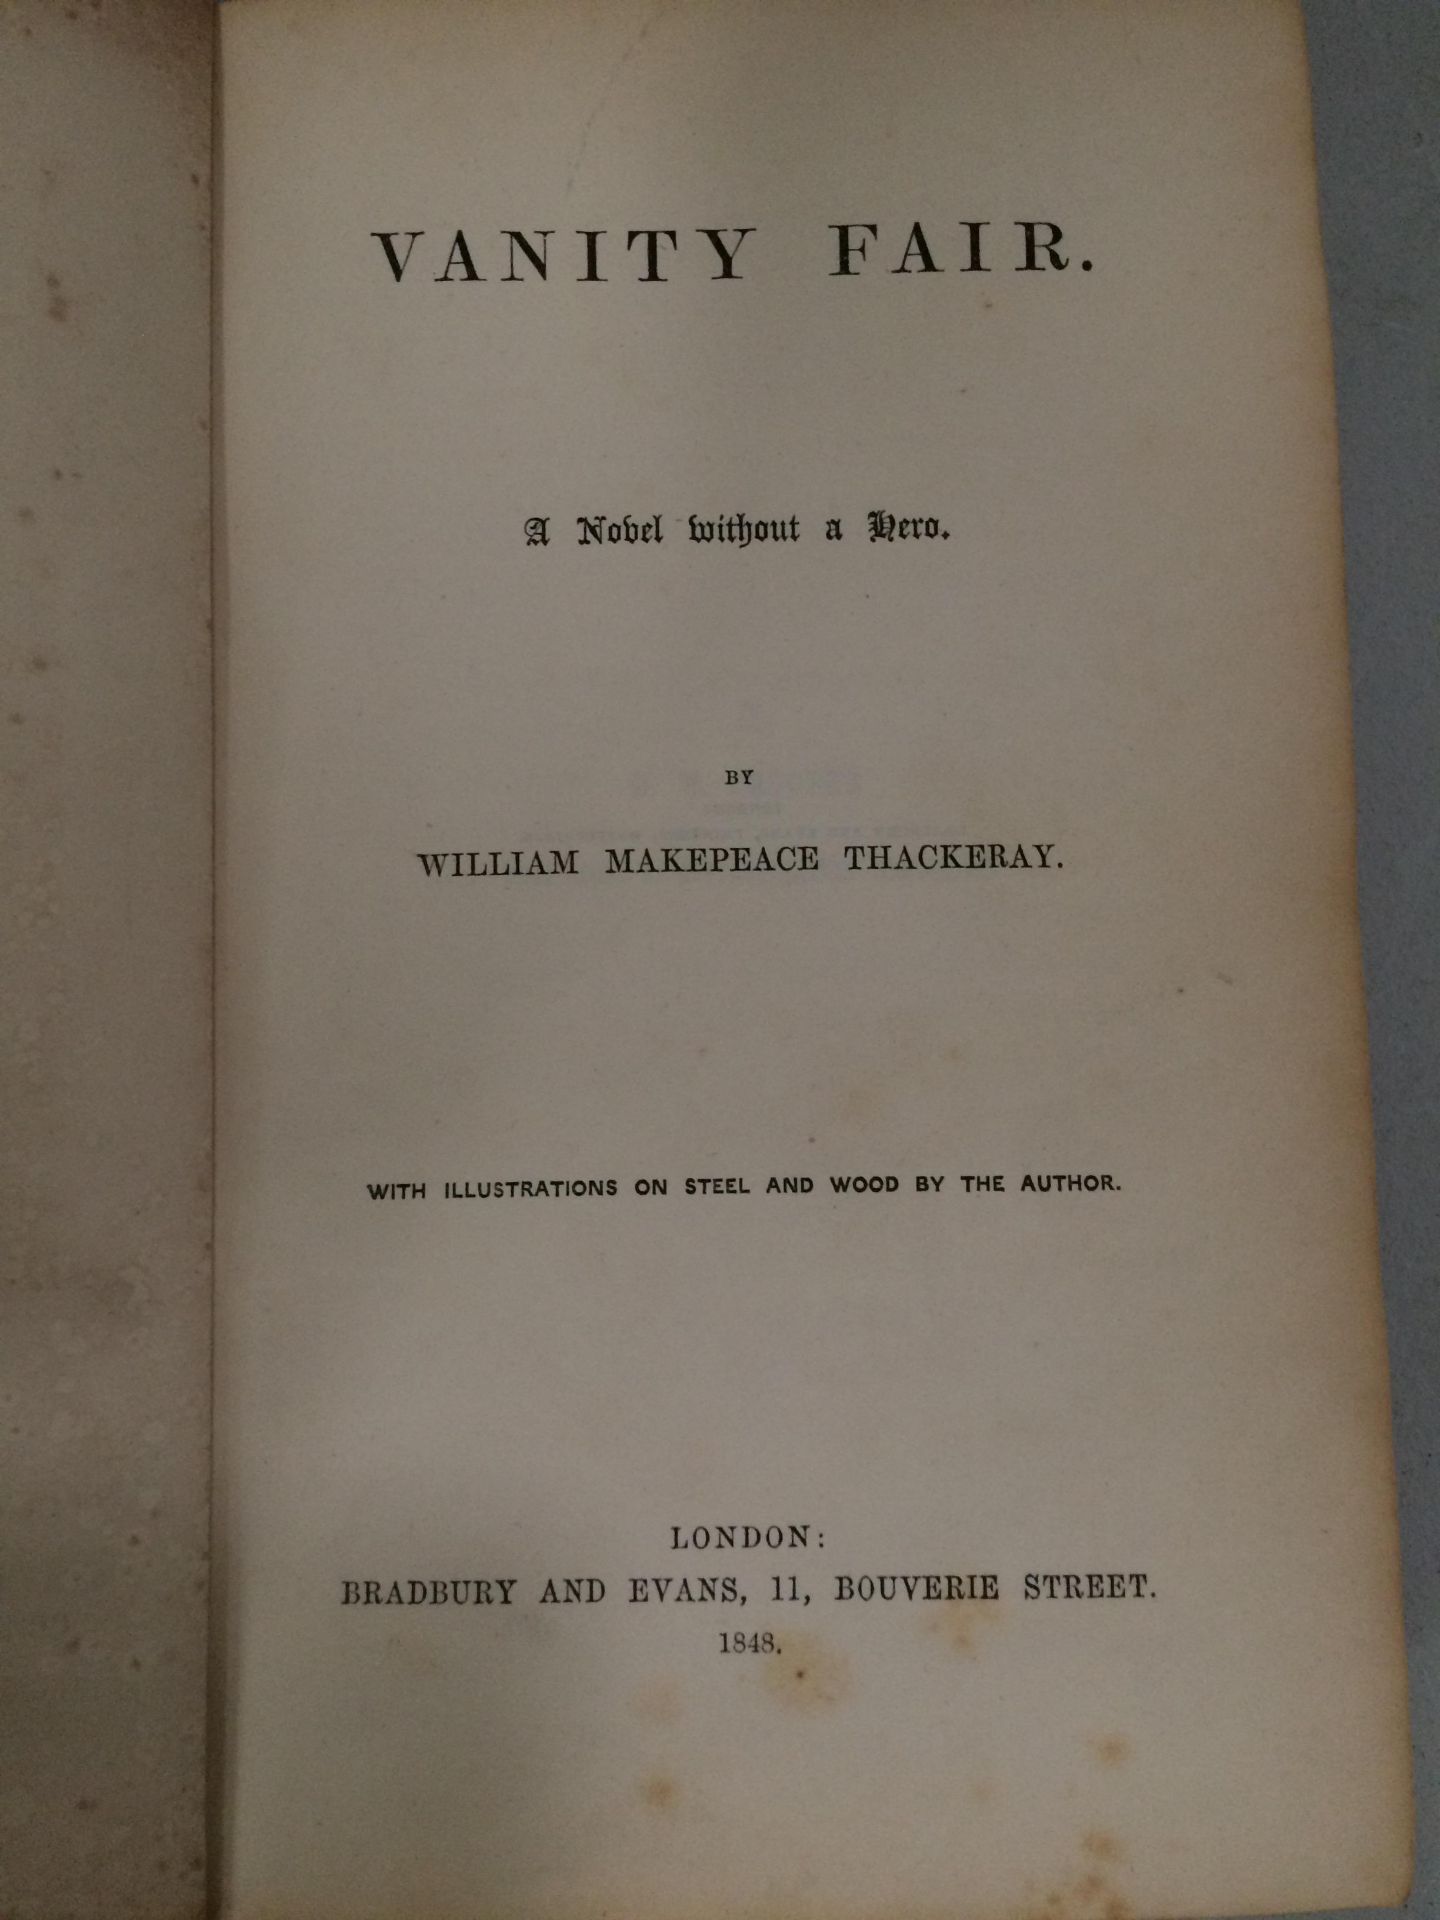 WILLIAM MAKEPEACE THACKERAY VANITY FAIR - a novel without a hero published by Bradbury and Evens, - Image 4 of 4